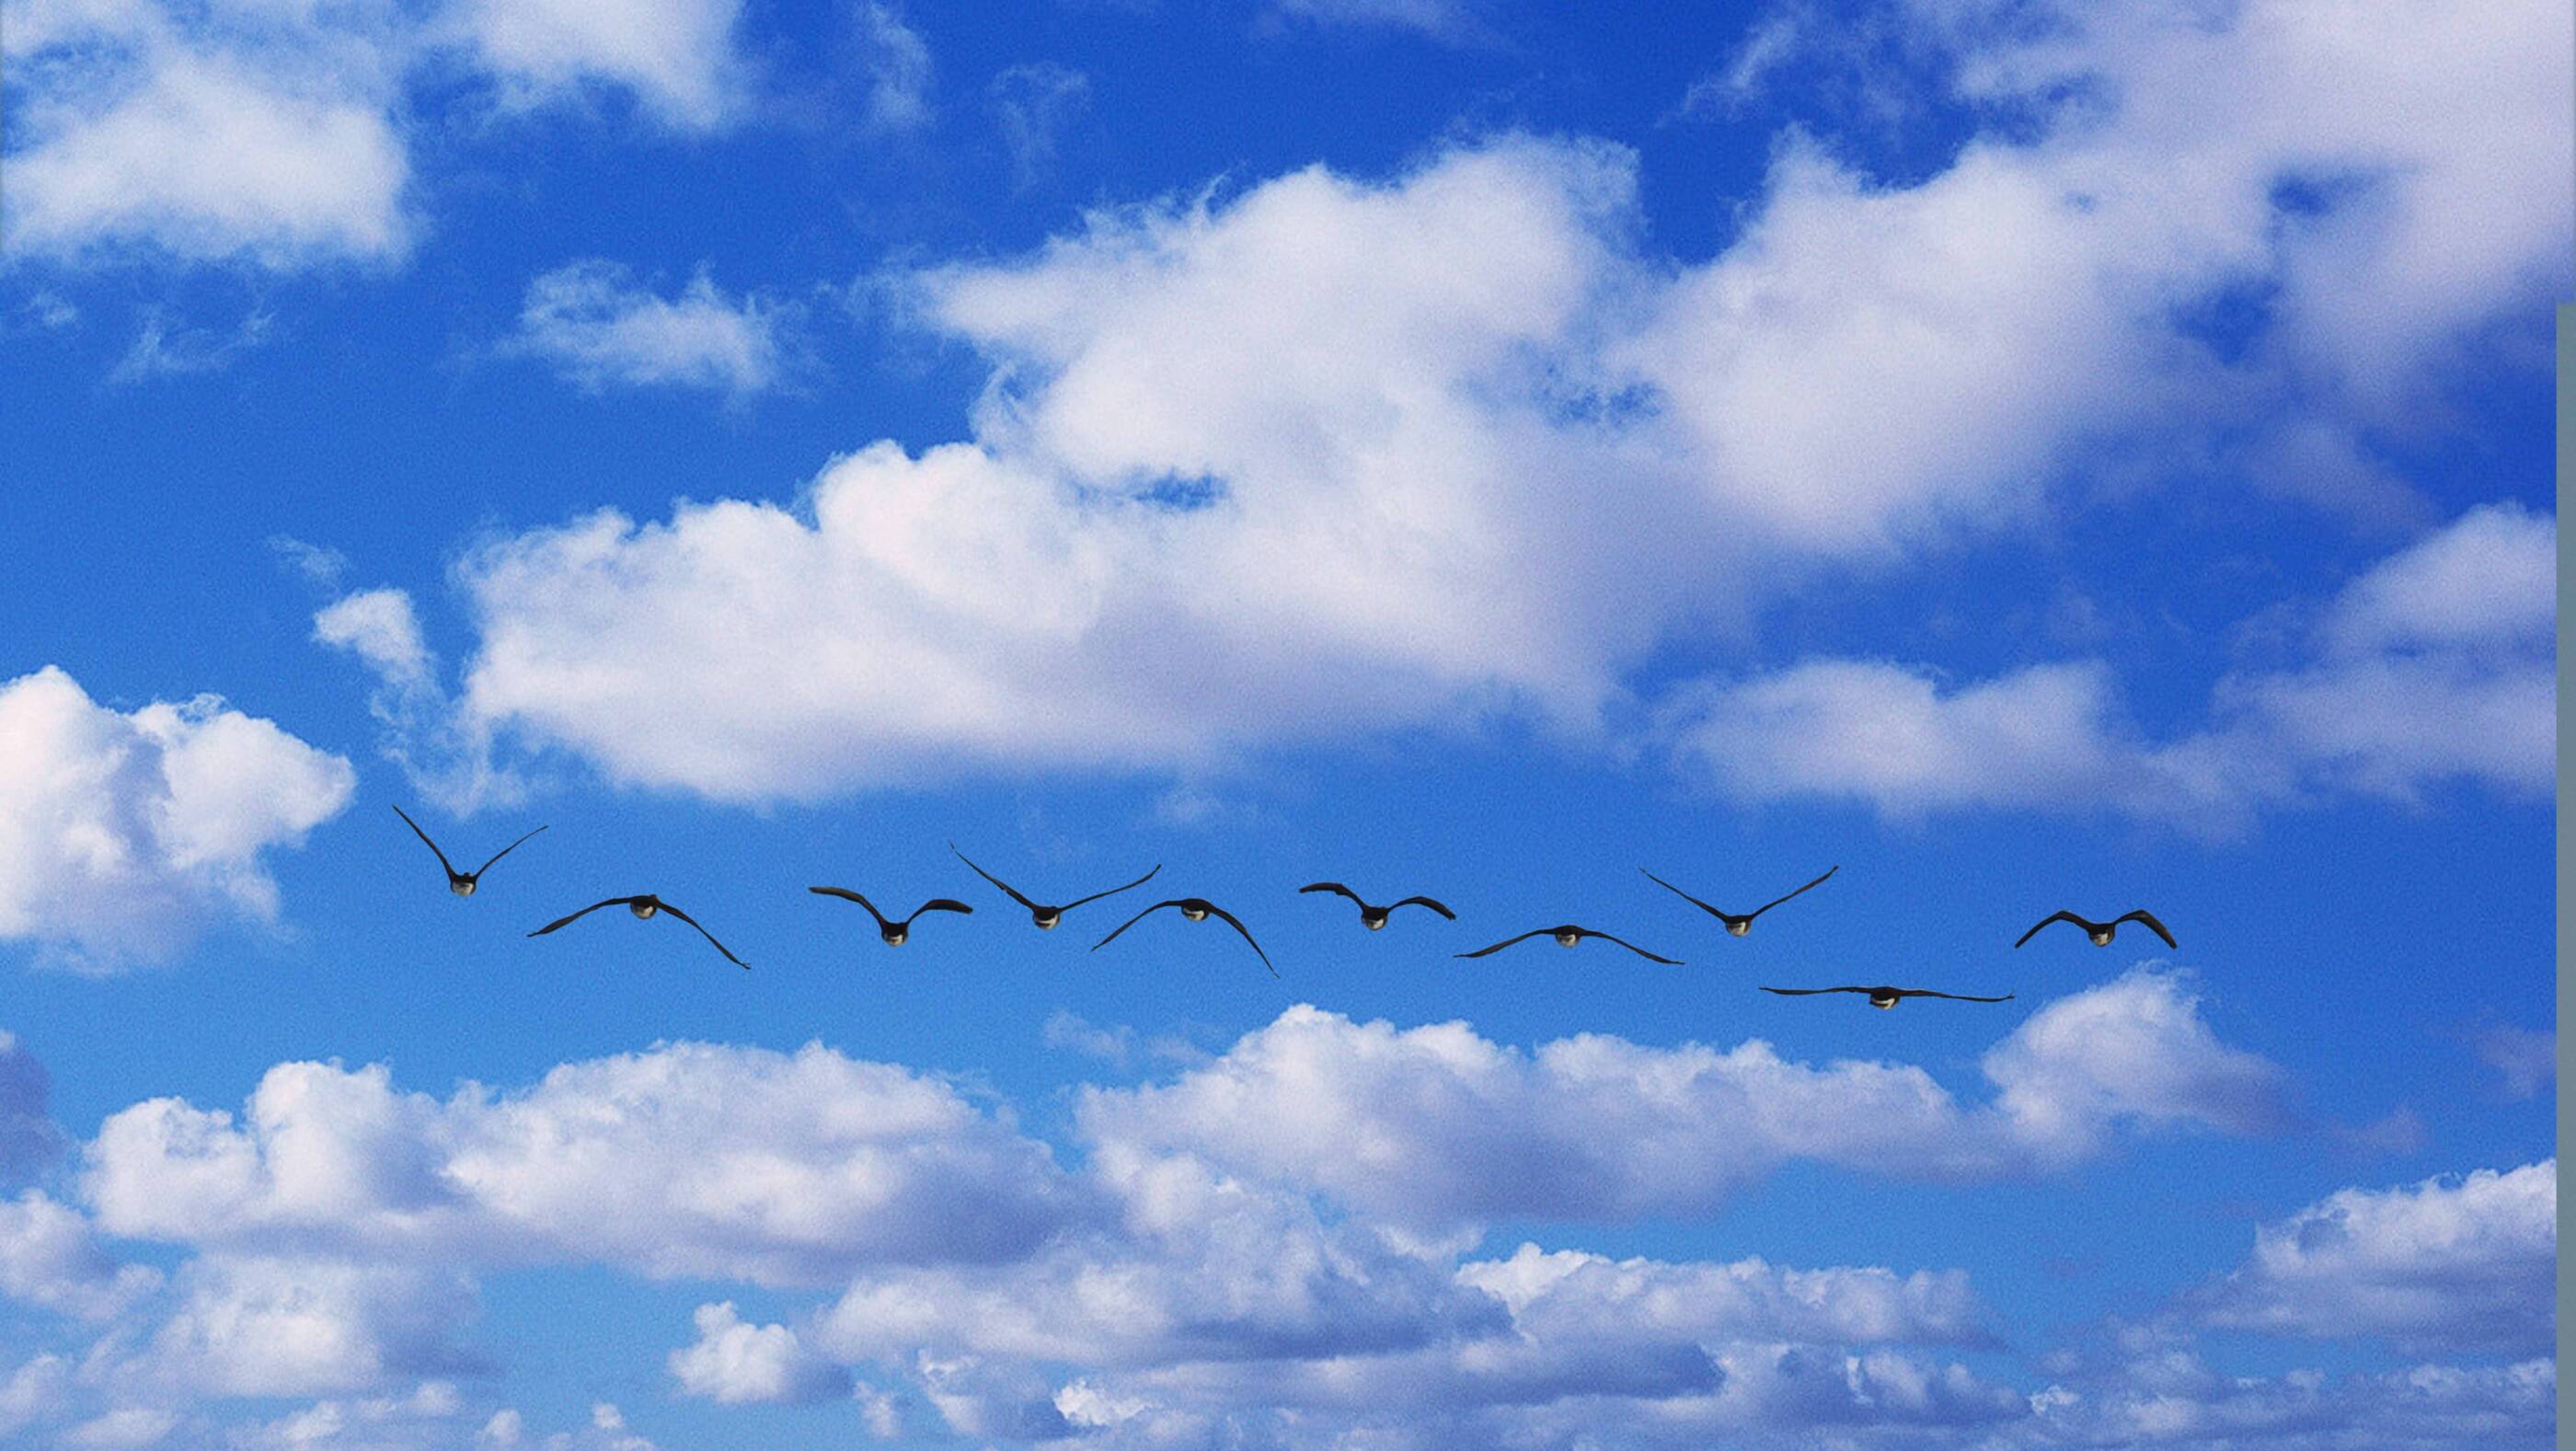 birds in flight, blue sky and clouds